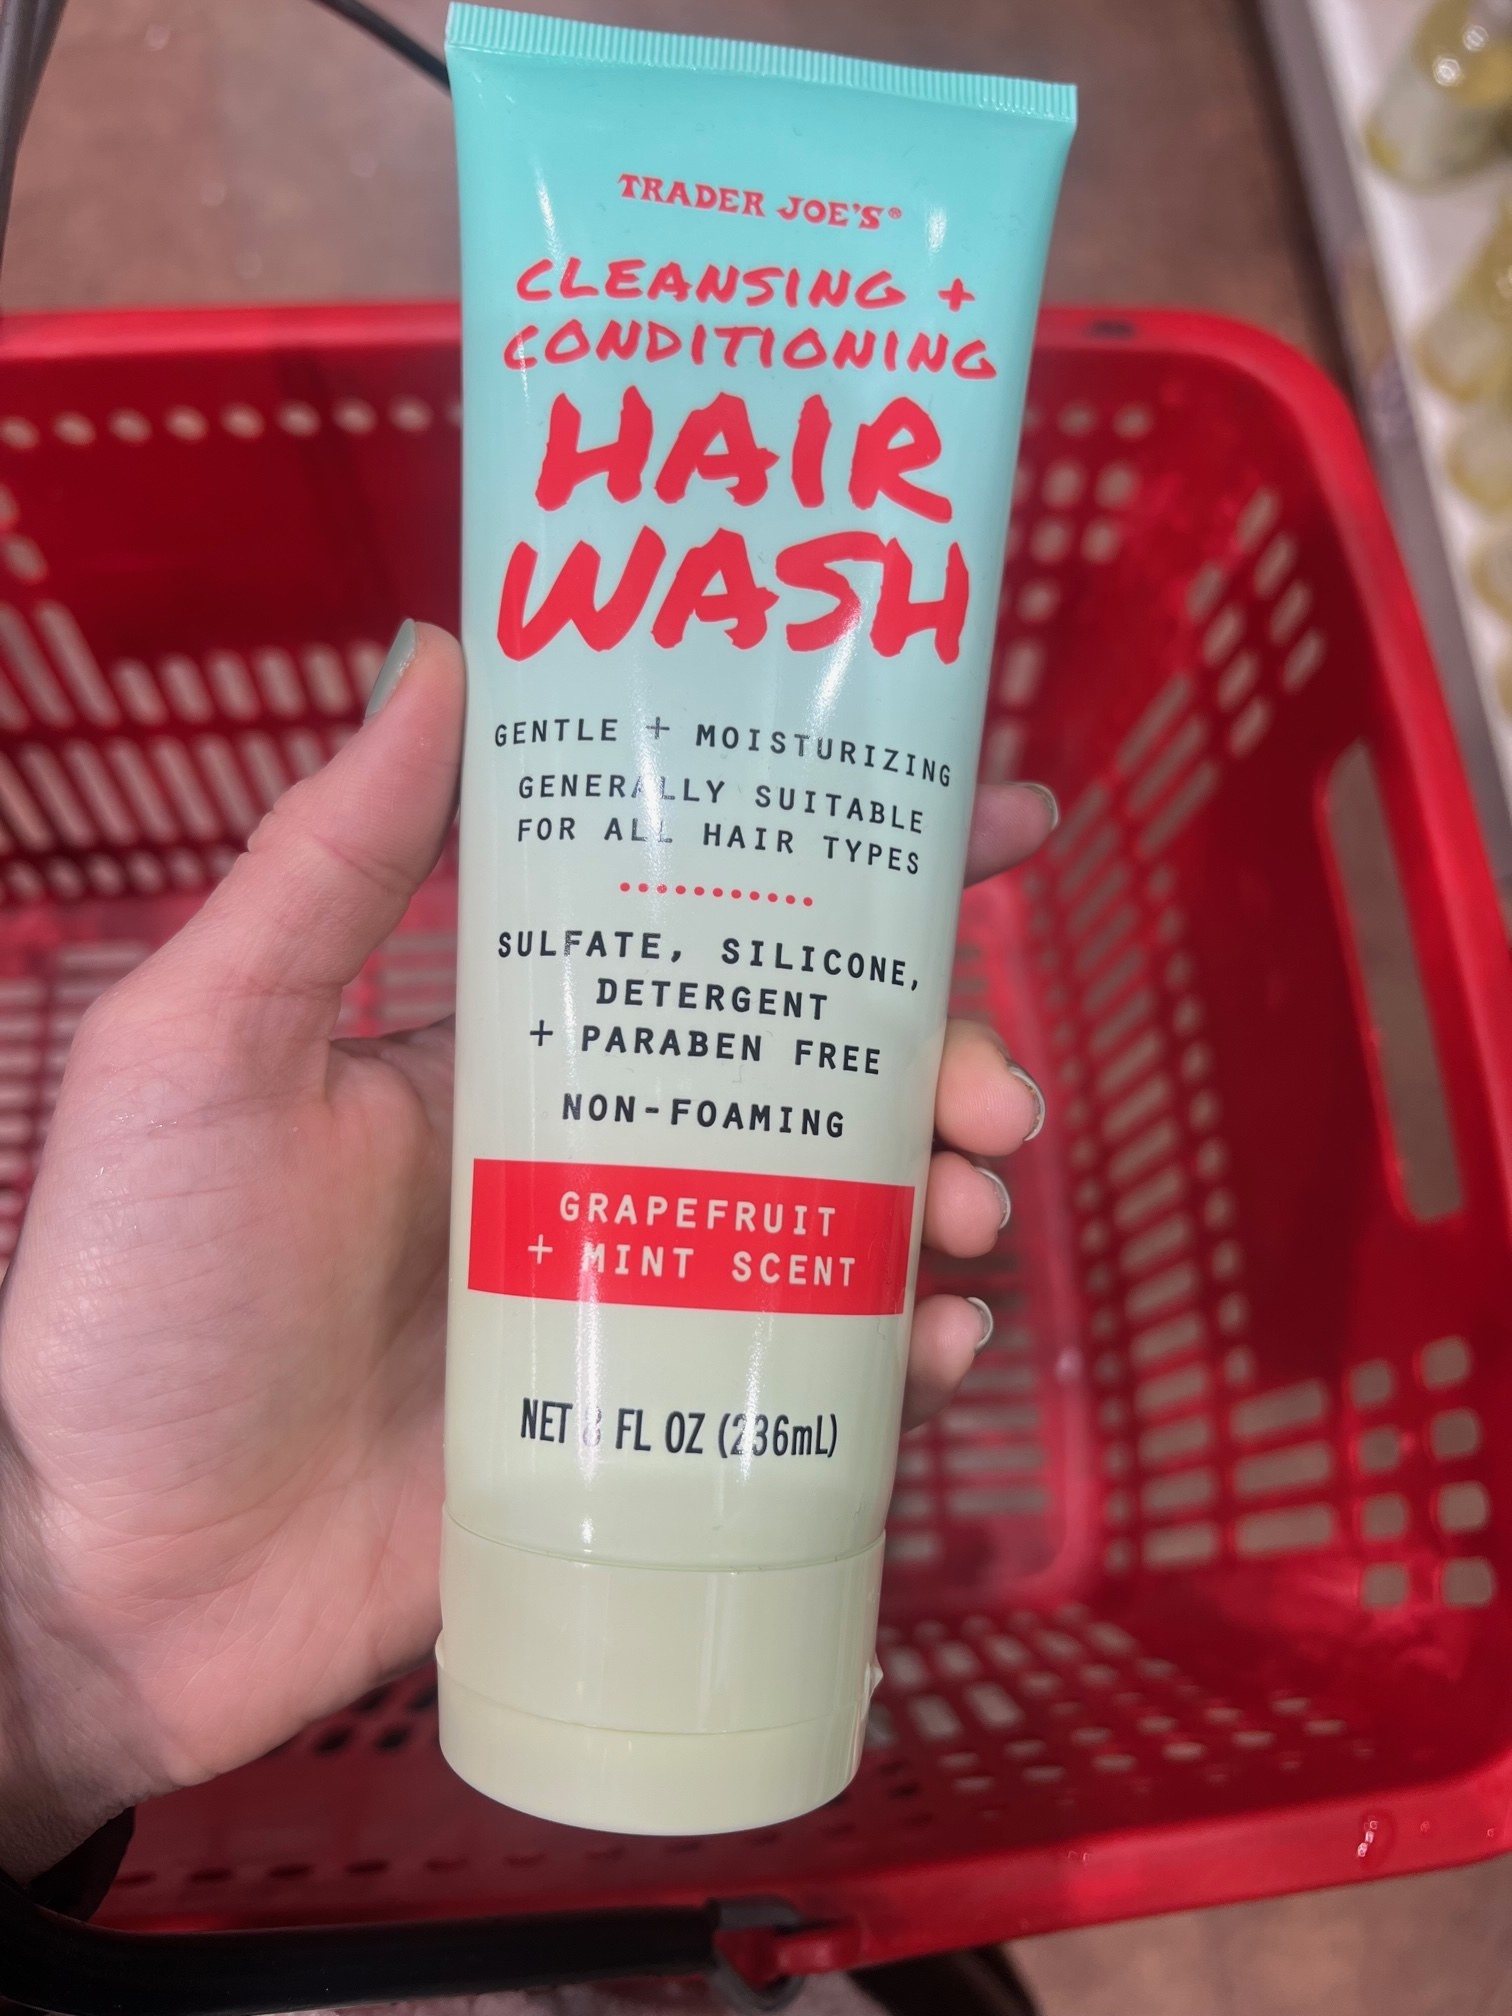 Cleansing + Conditioning Hair Wash